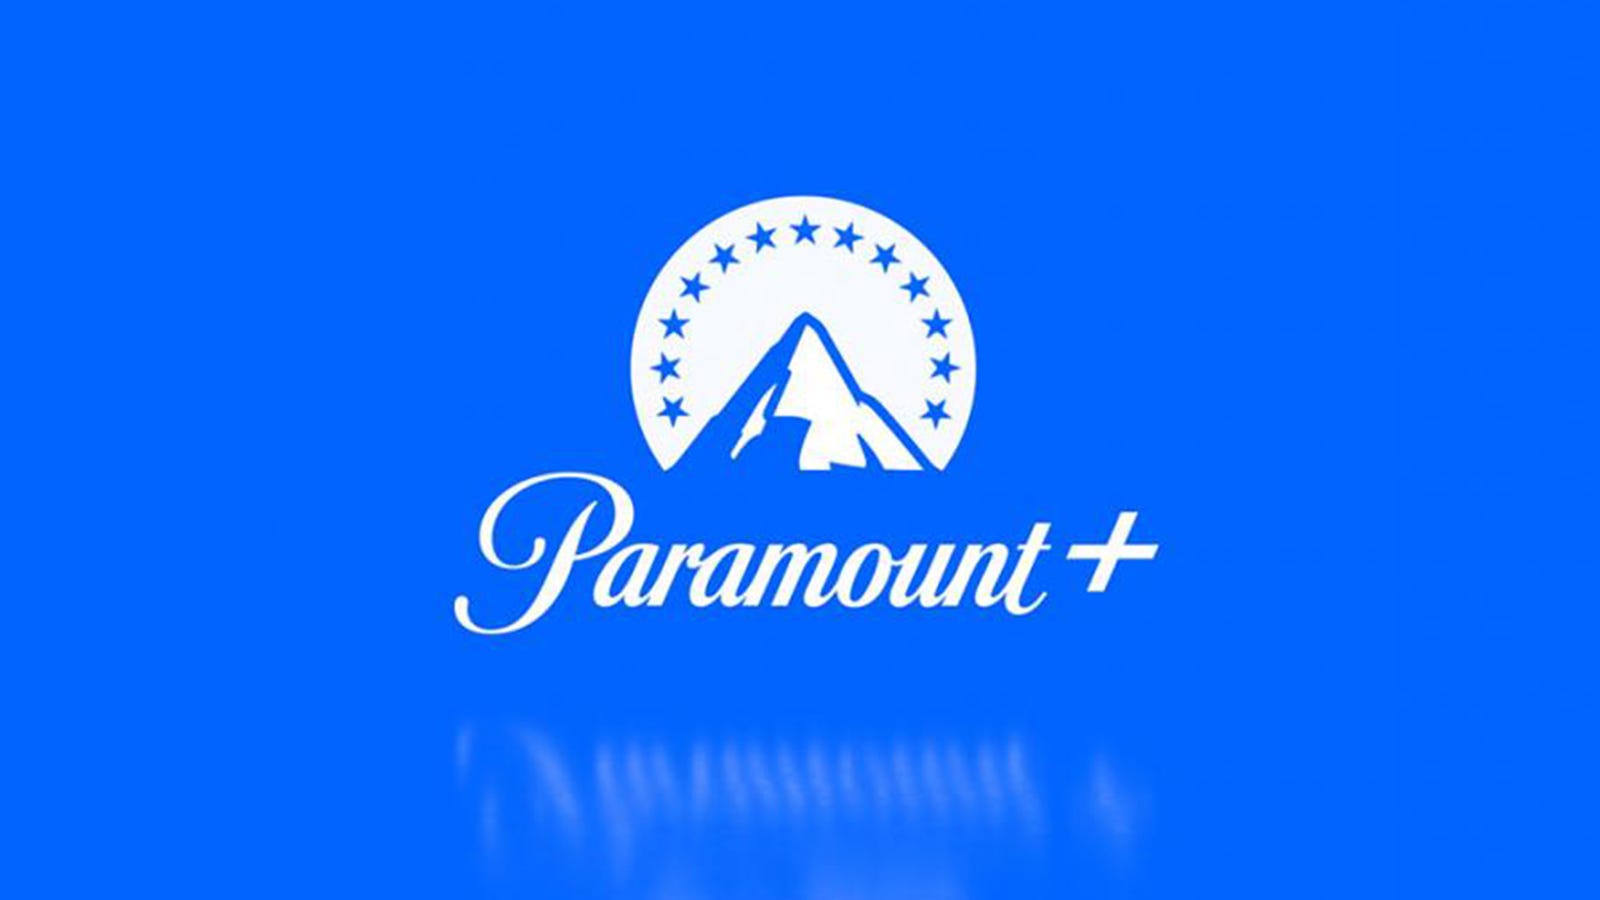 How to watch live sports on Paramount+ UEFA Champions League, NFL, boxing with SHOWTIME and more Goal US